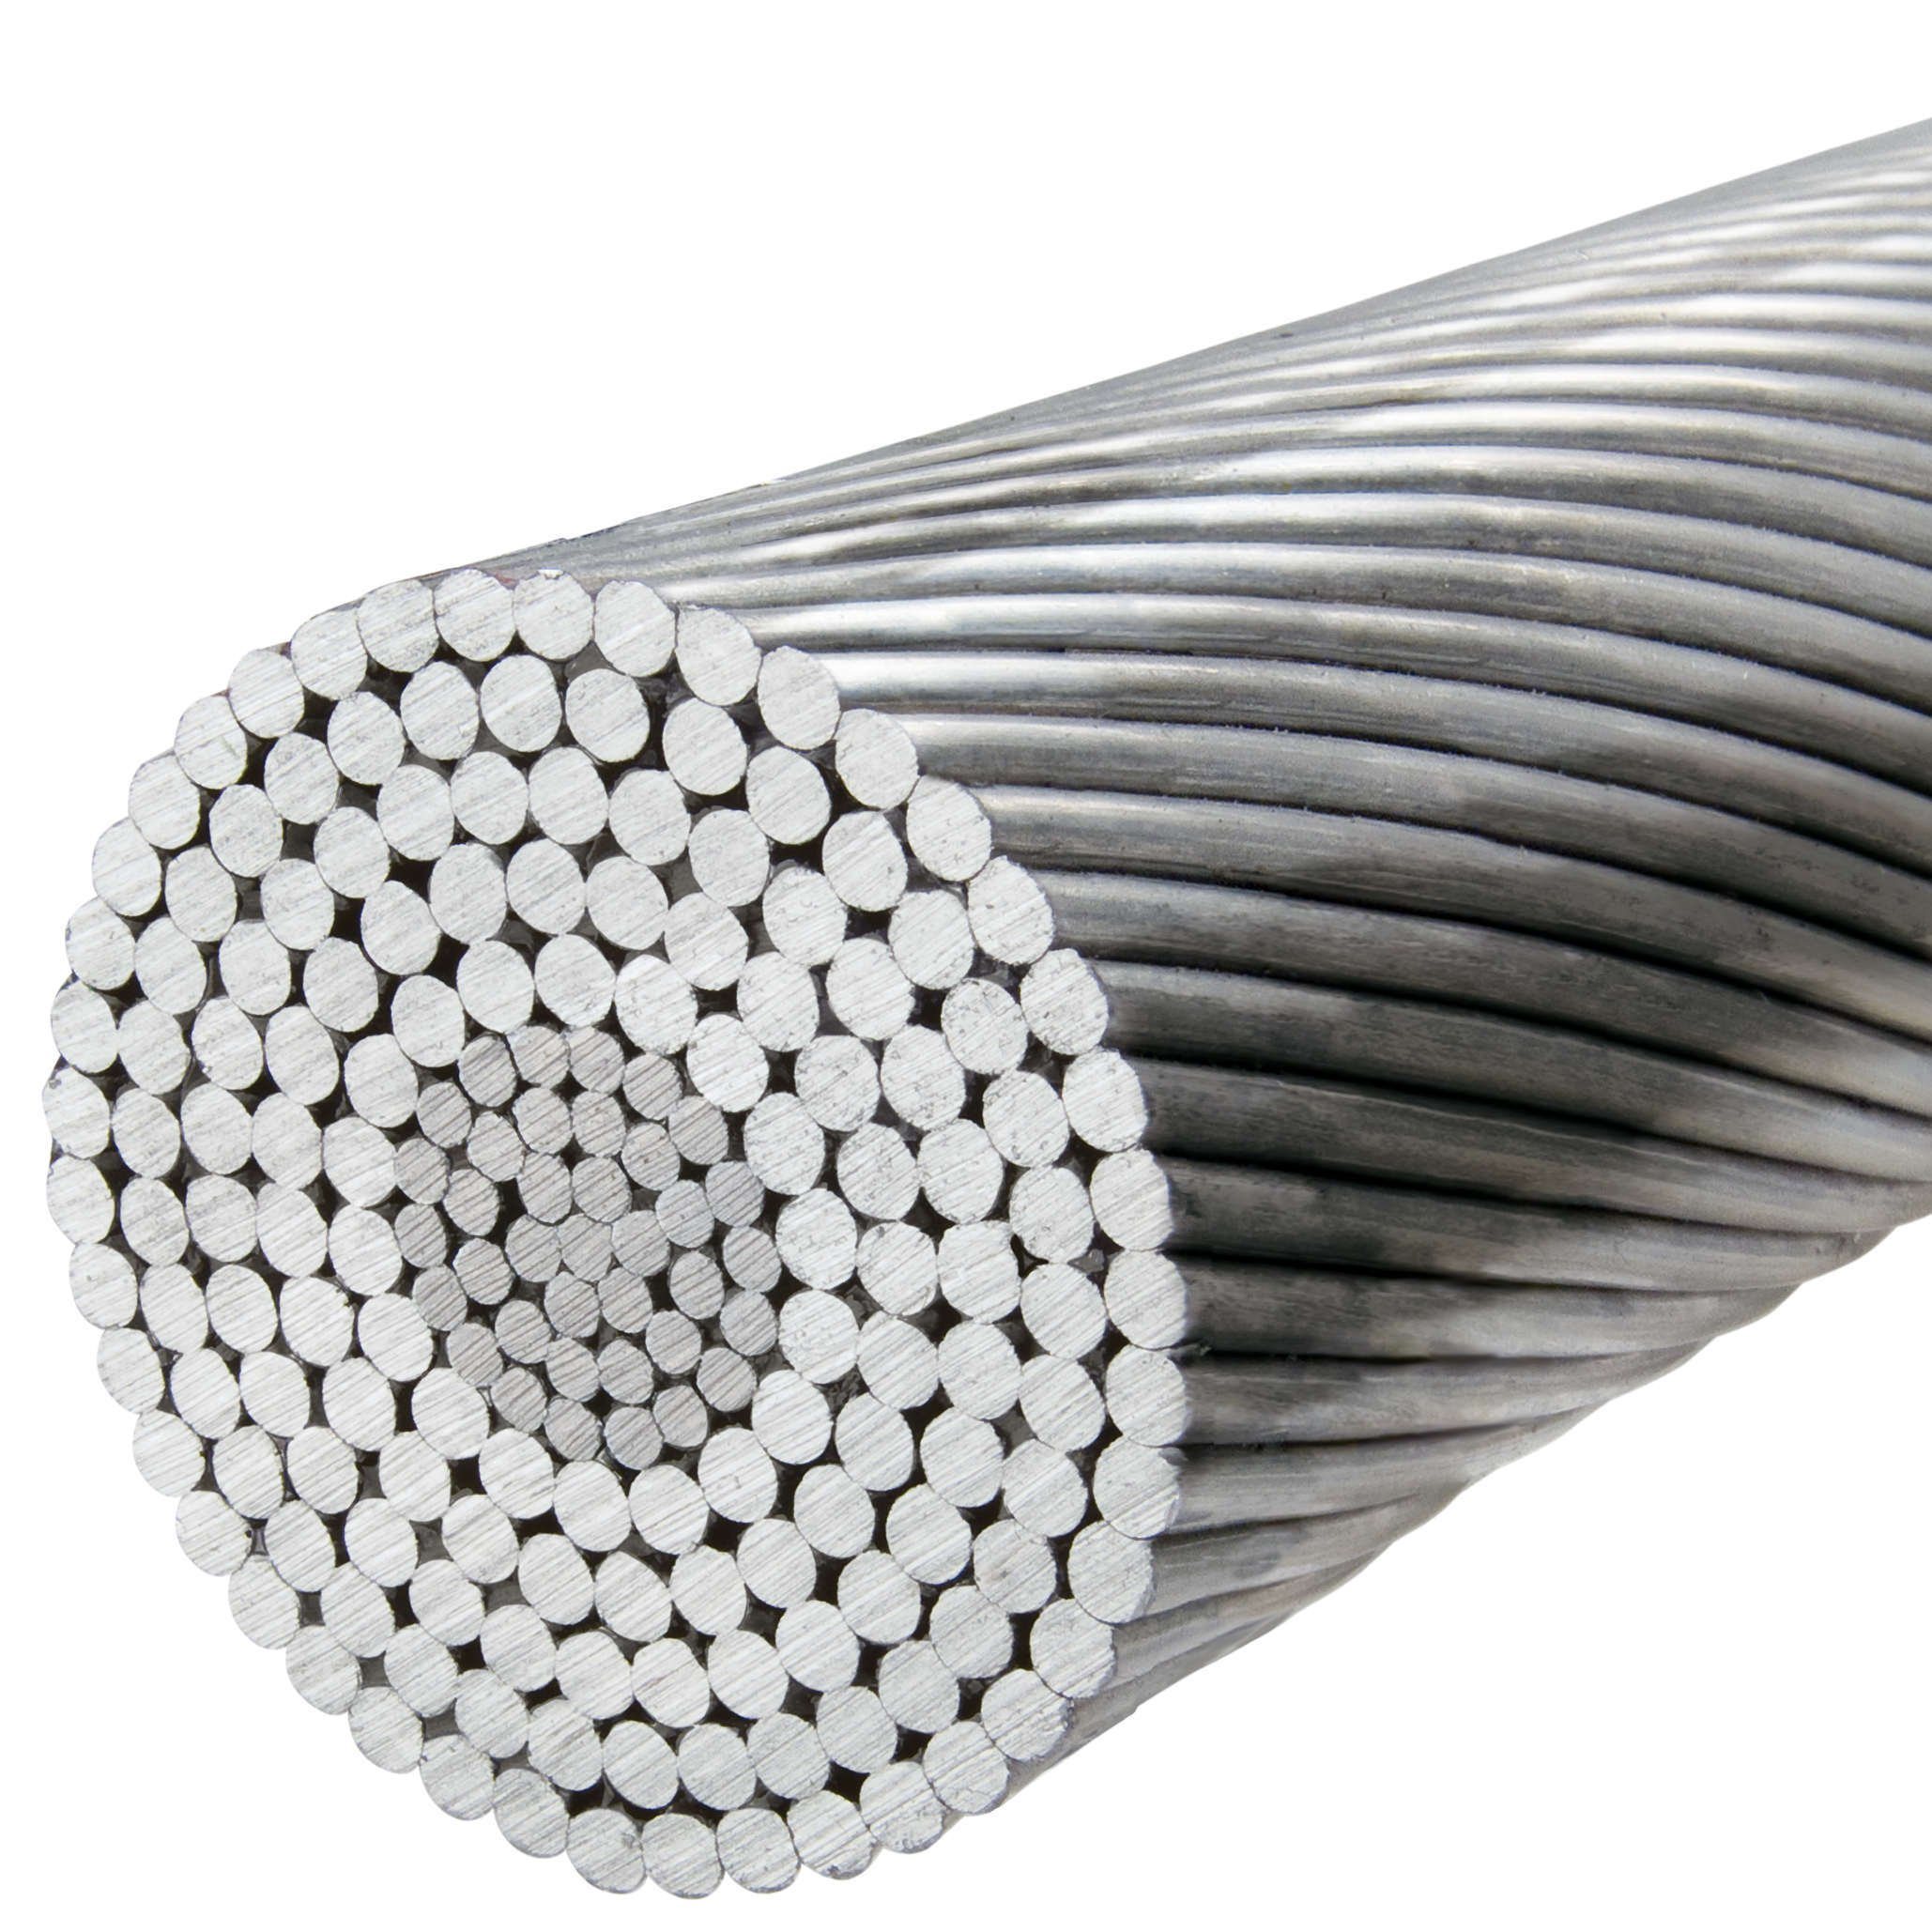 
                Aluminum Conductor Steel Reinforced Bare Conductor
            